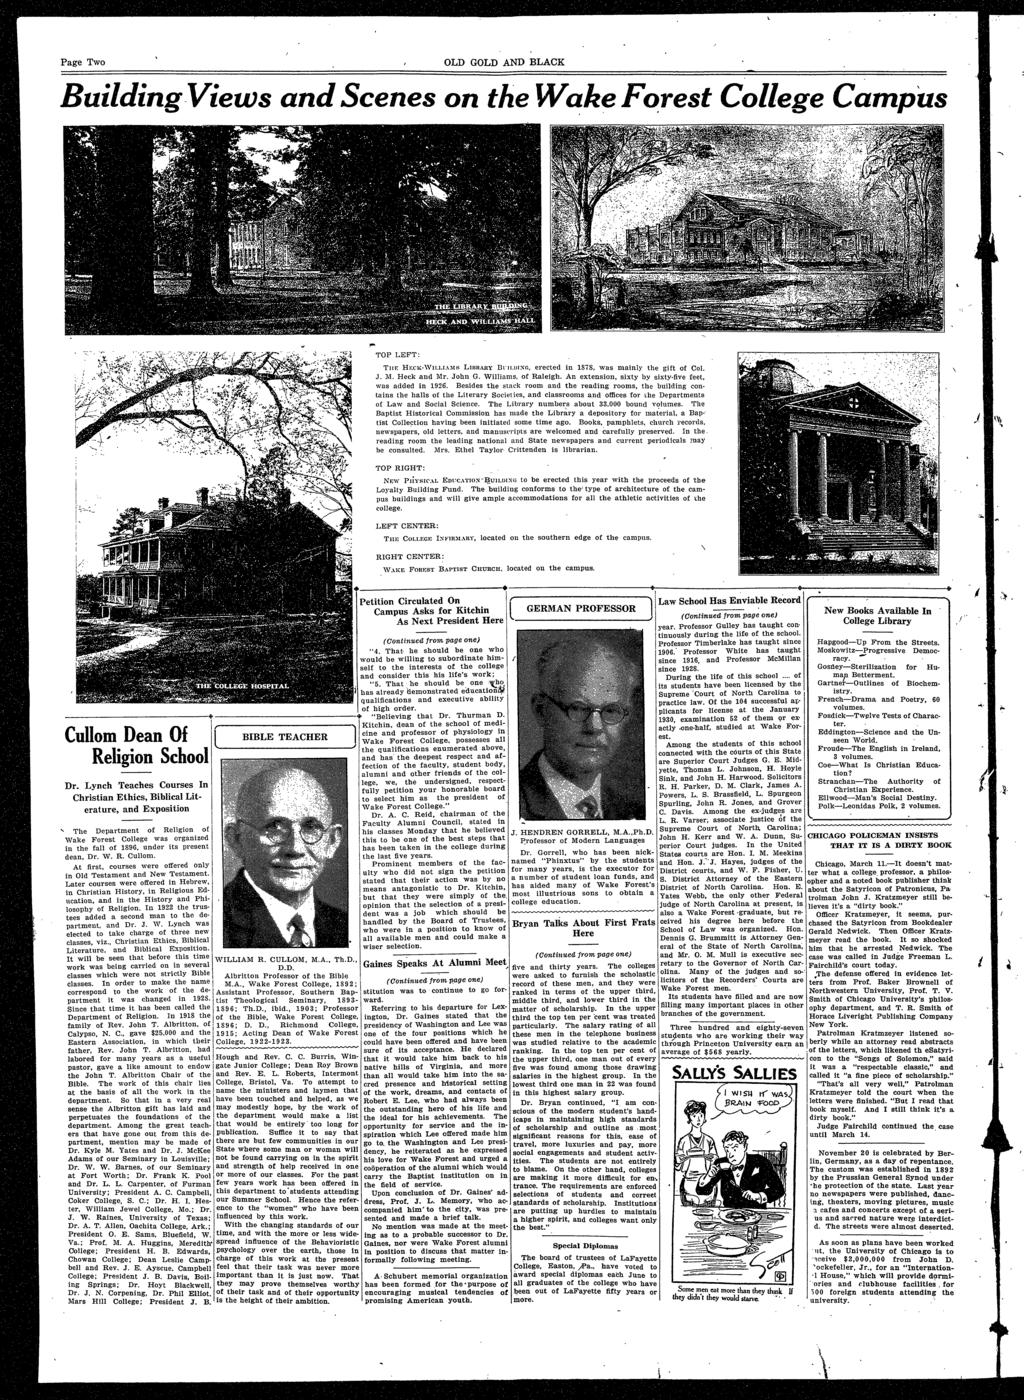 Page Two Budng Vews and Scenes on the Wake F o_rest Coege CampUs TOP LEFT: TnE HECK-~W...~ts L!ARY Tn.uxr., erected n 878, was many the gft of Co. J. M. Heck and Mr. John G. Wams, of Raegh.